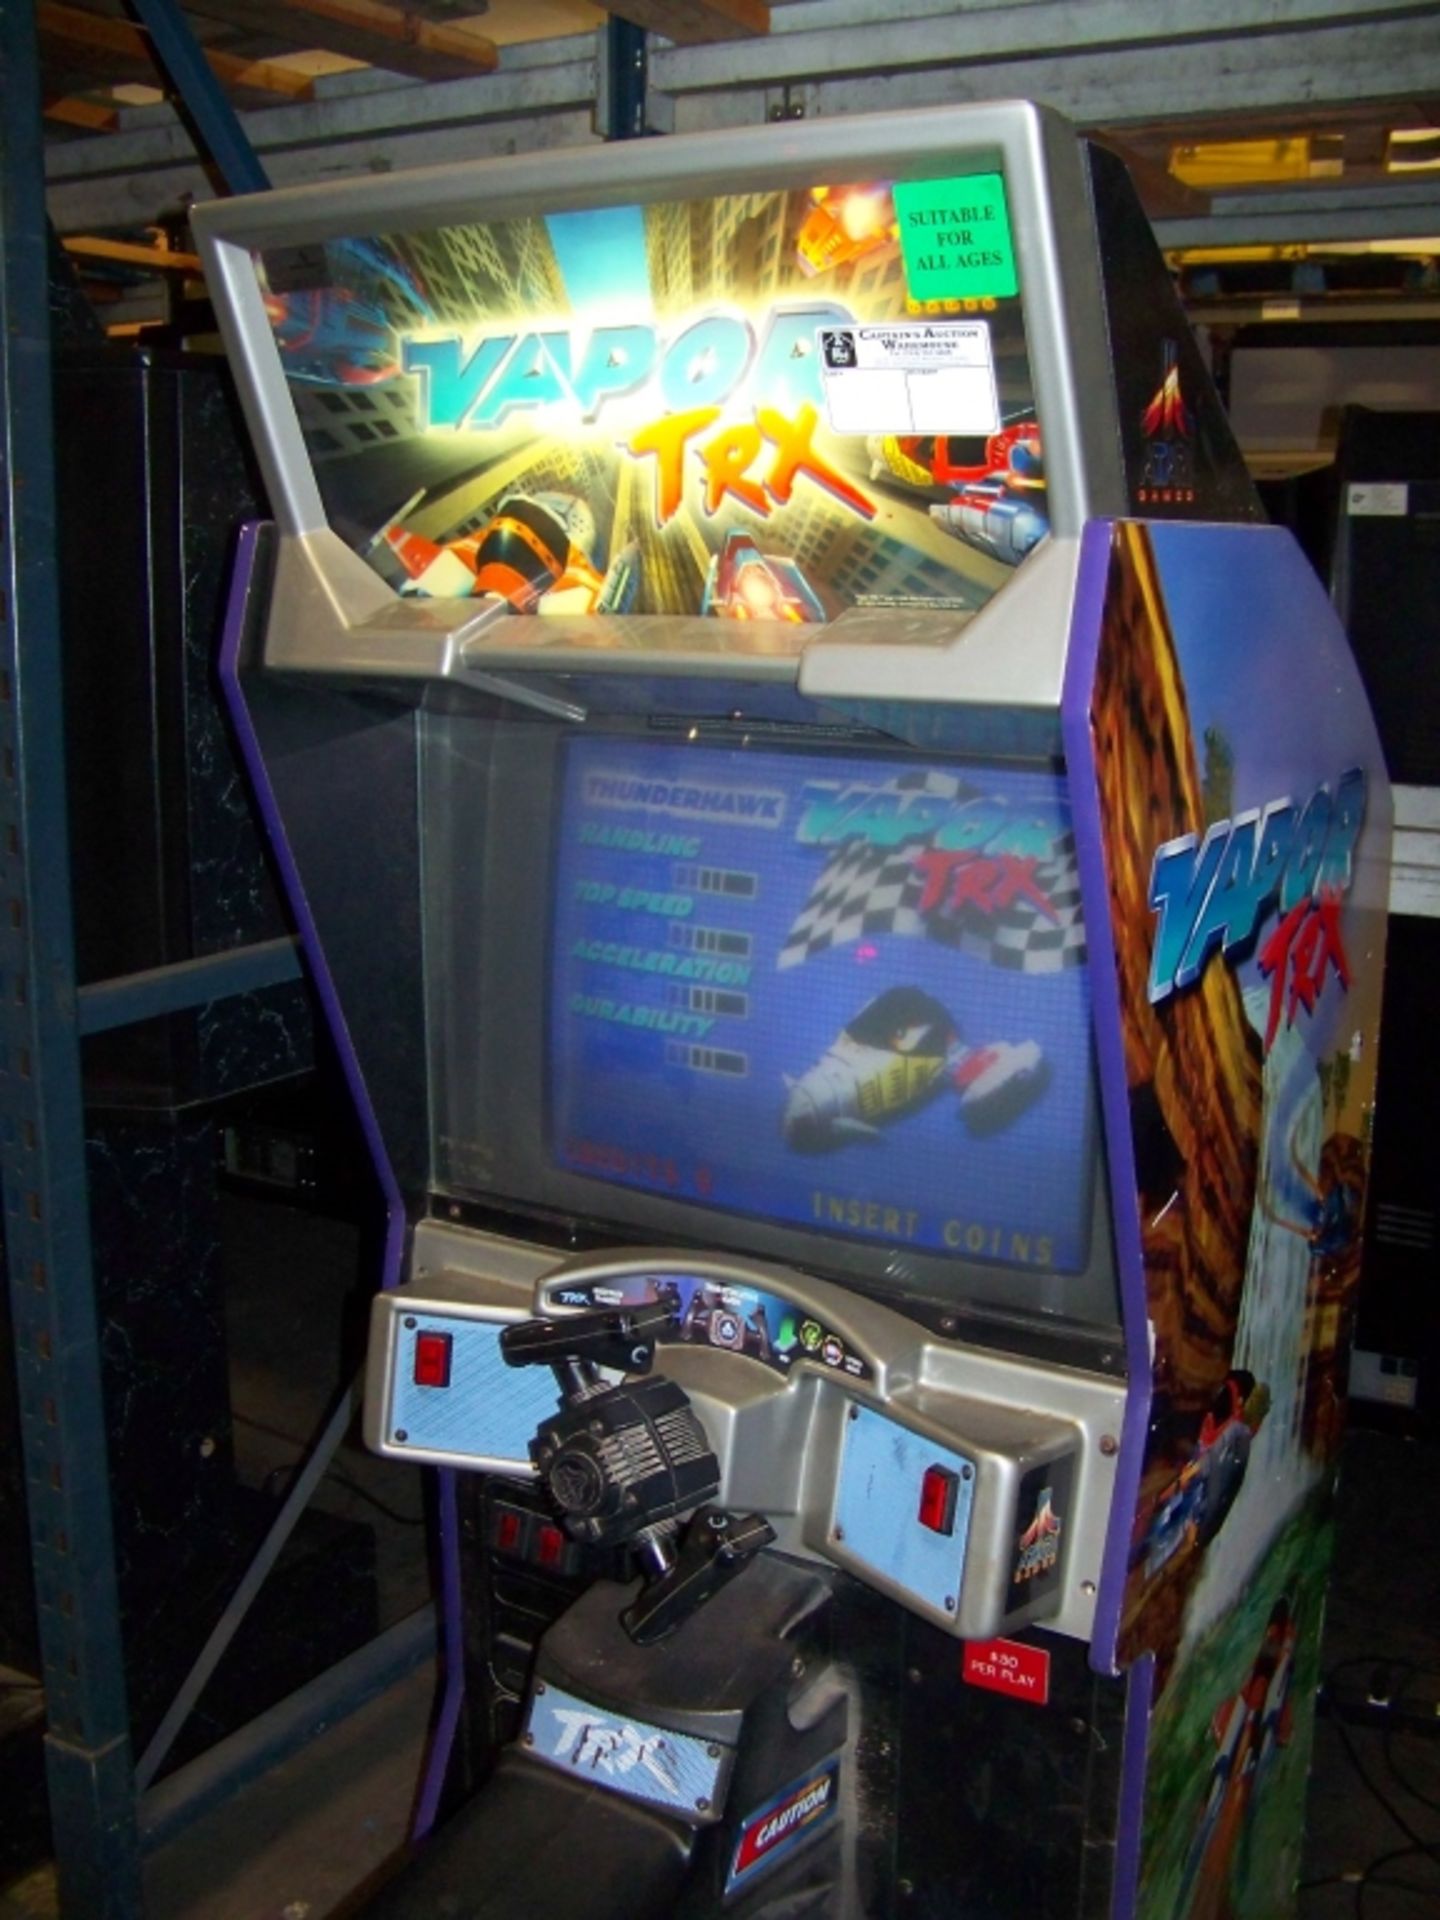 VAPOR TRX RACING ARCADE GAME ATARI Item is in used condition. Evidence of wear and commercial - Image 2 of 3